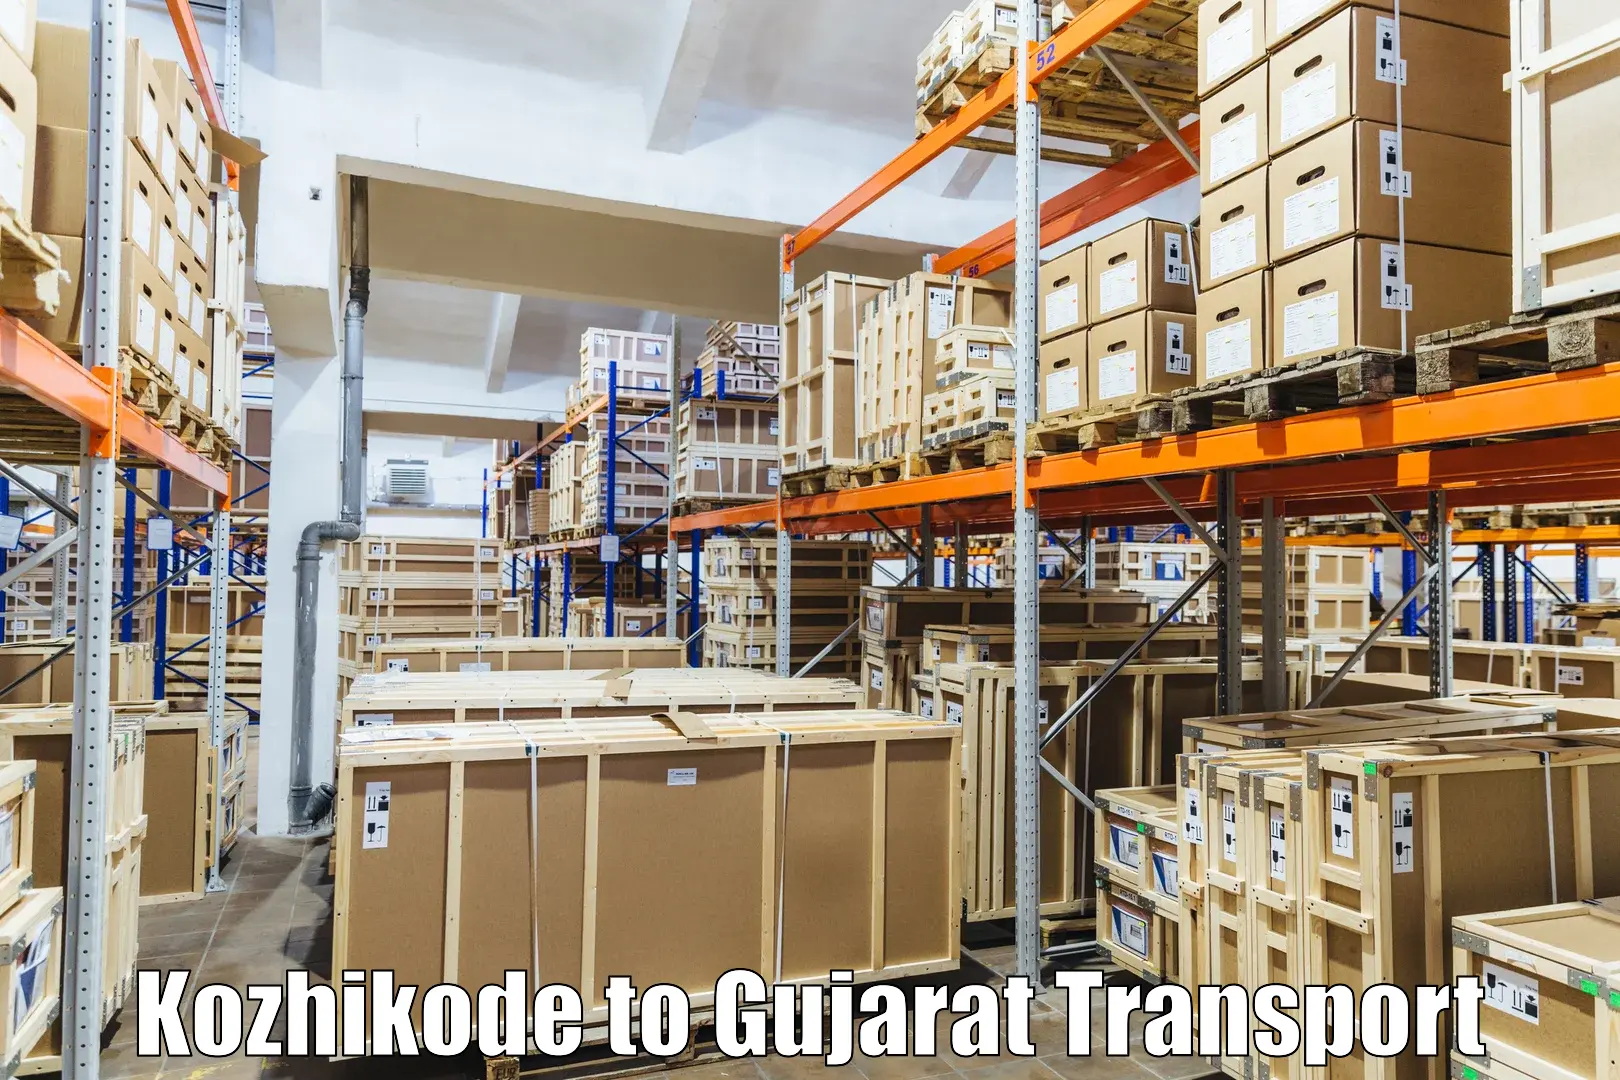 Transport bike from one state to another Kozhikode to Gujarat